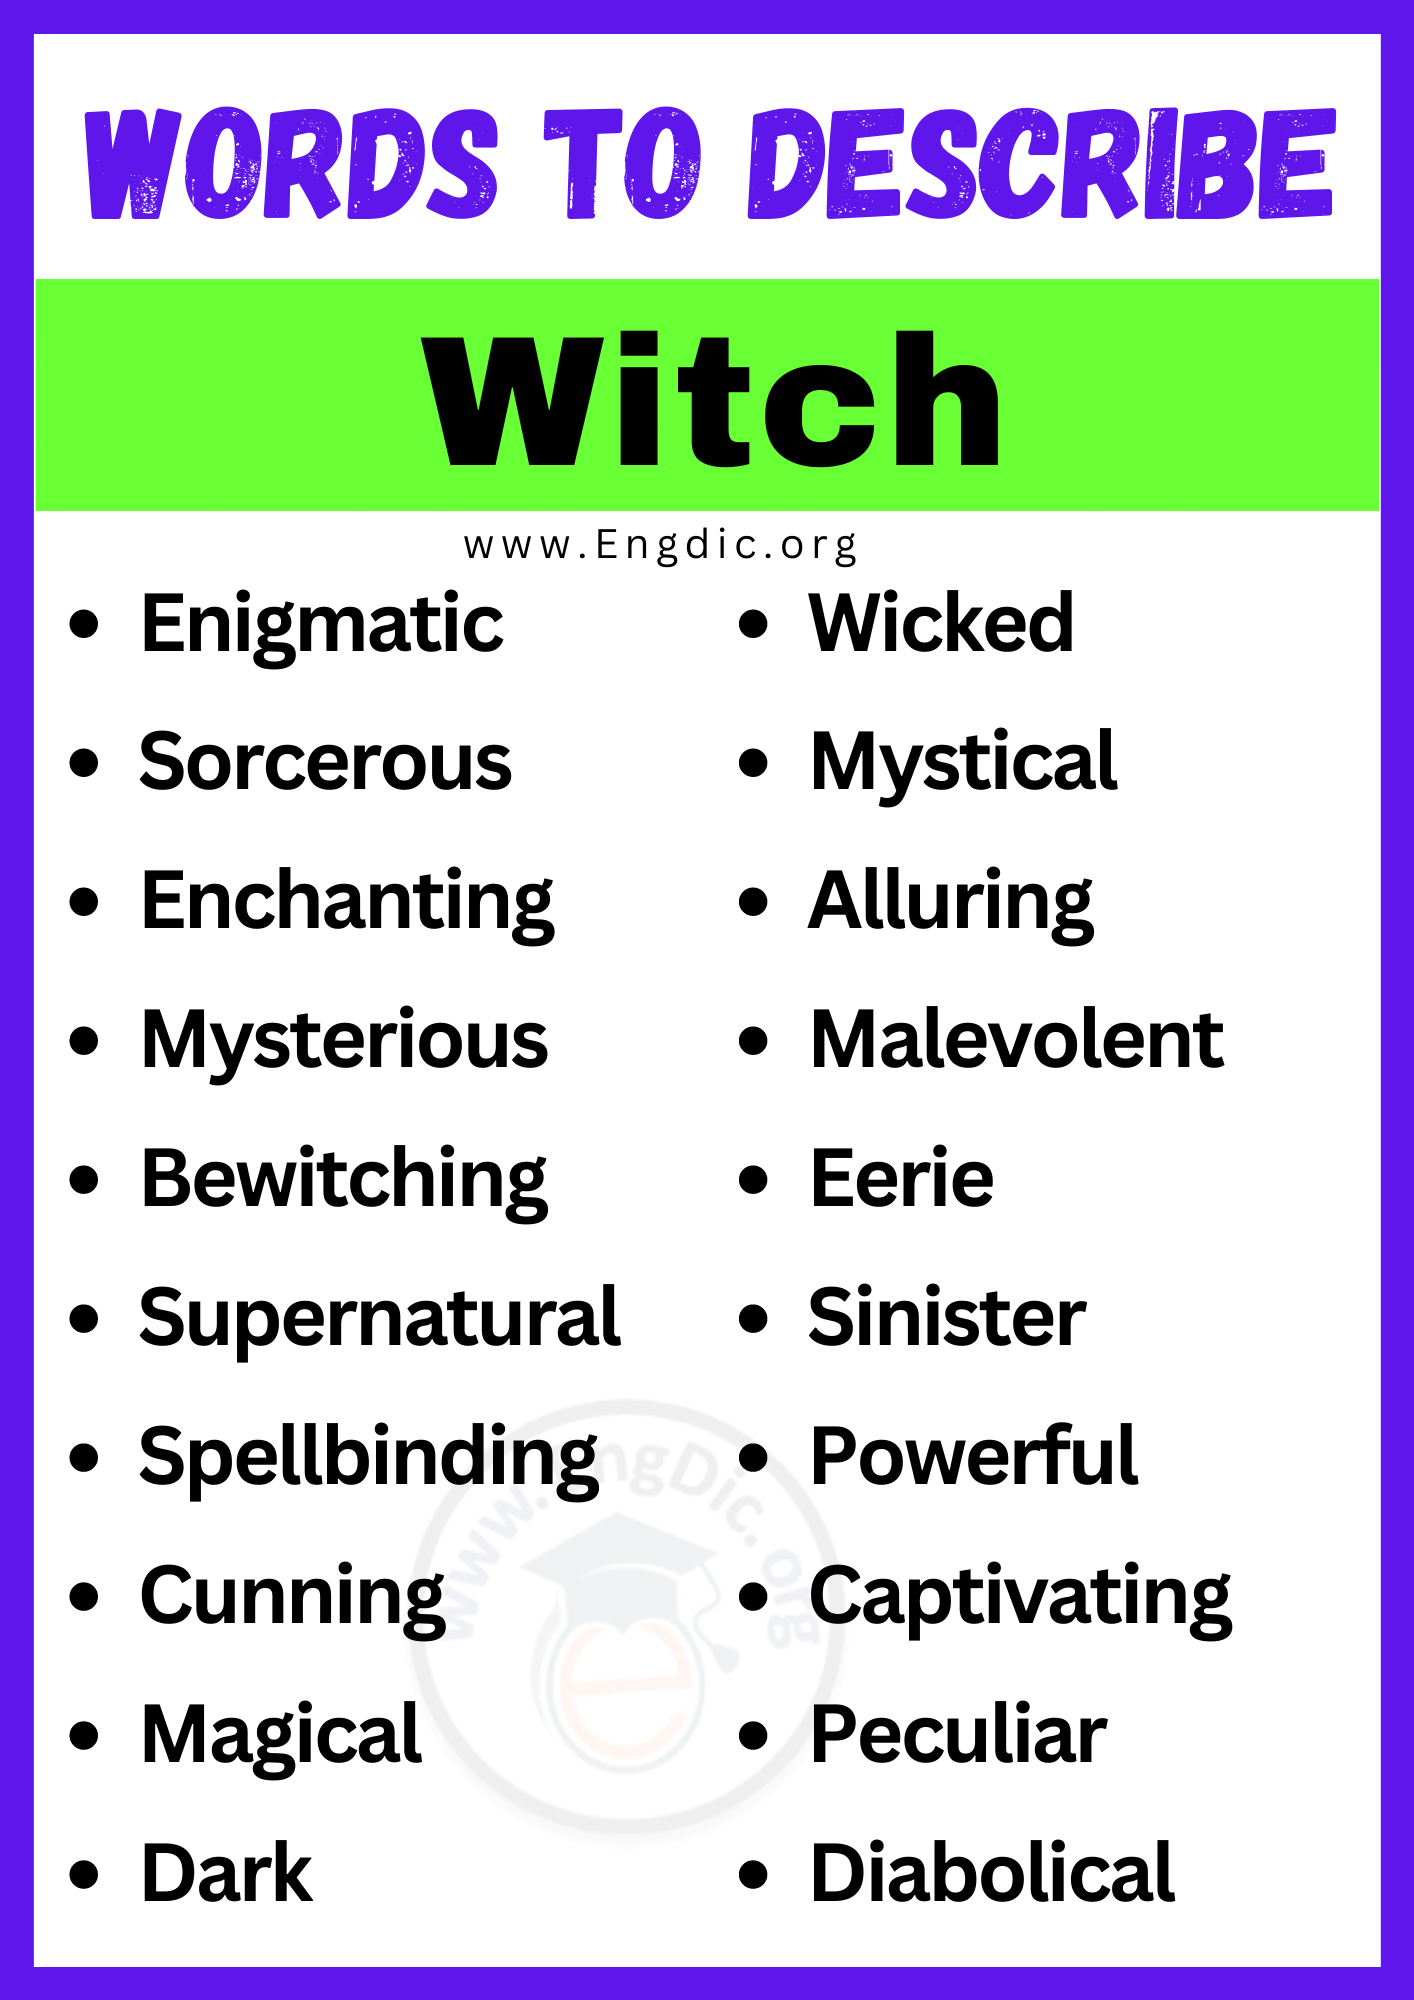 Words to Describe Witch